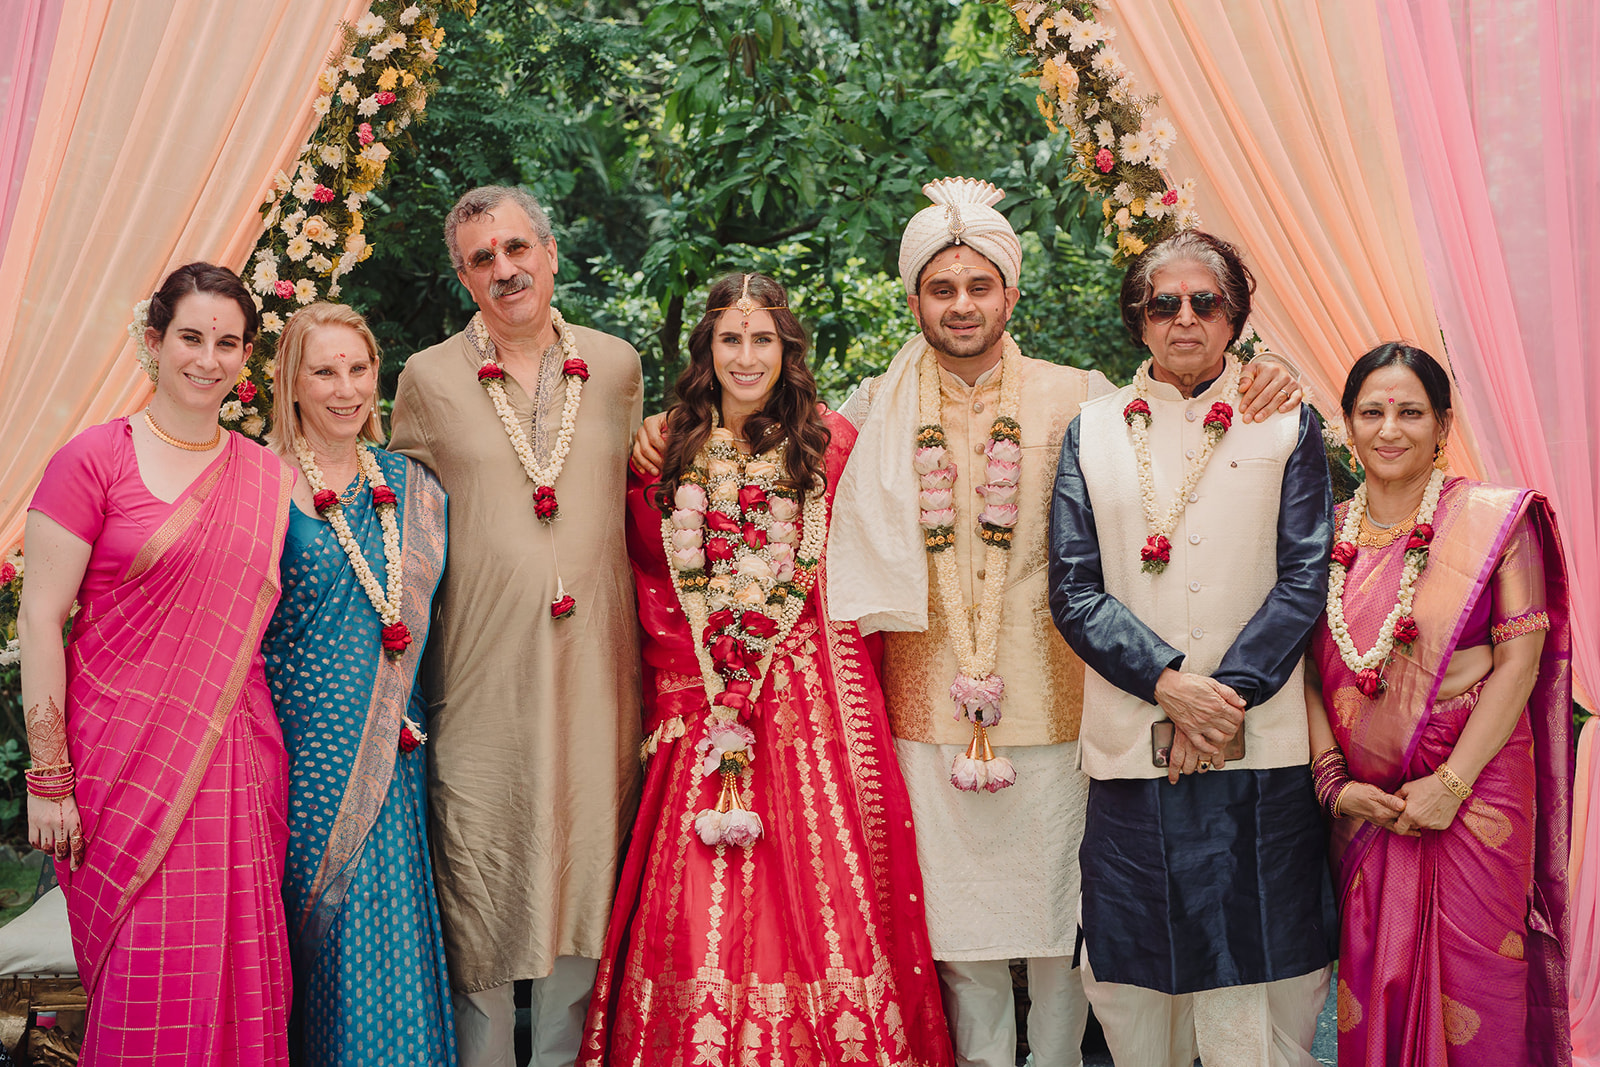 Bride and groom pose with their families for a heartwarming portrait